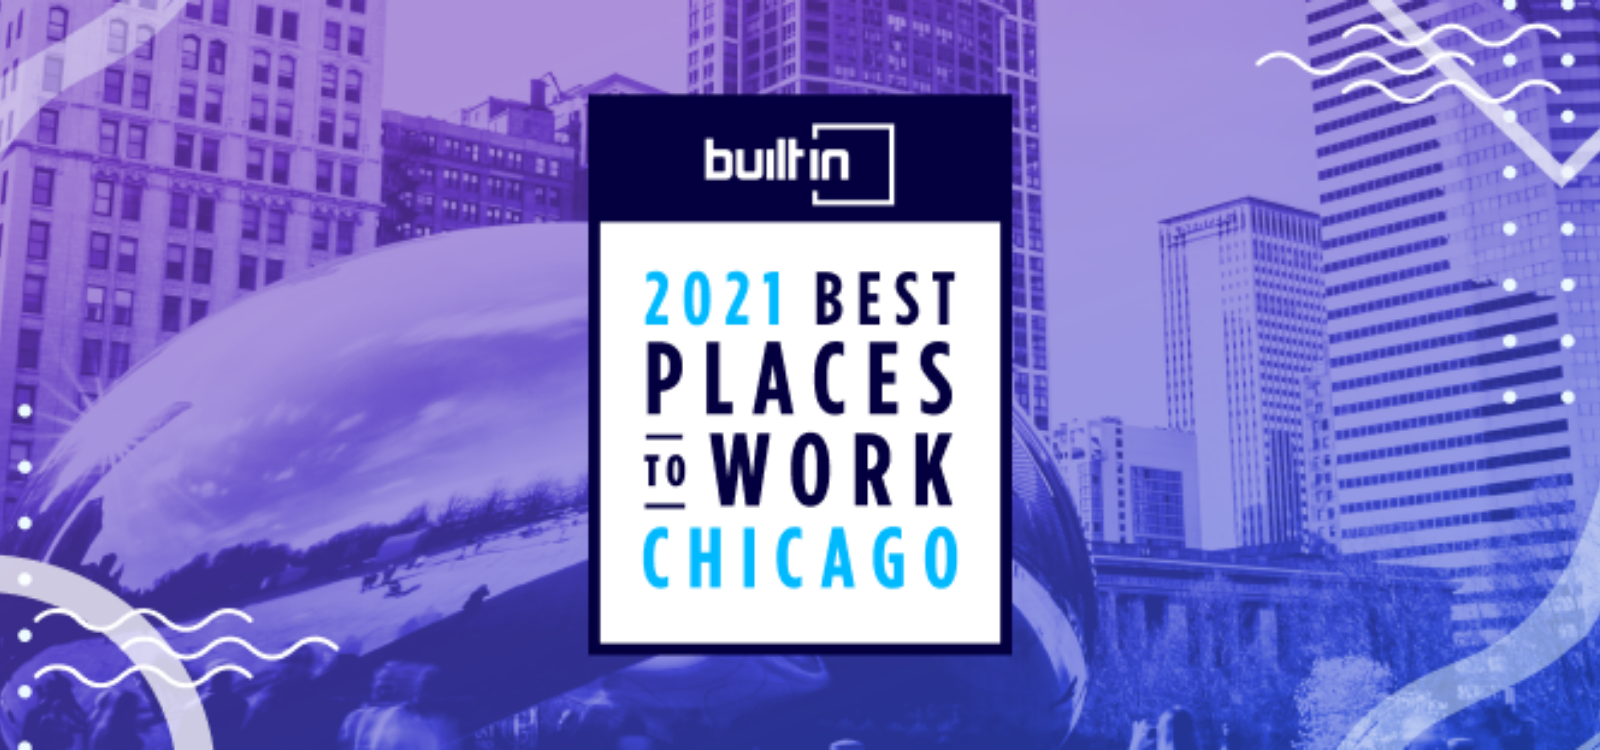 Ascent Named as One of Chicago’s Best Places to Work and Best Small Companies to Work for in 2021 by Built In